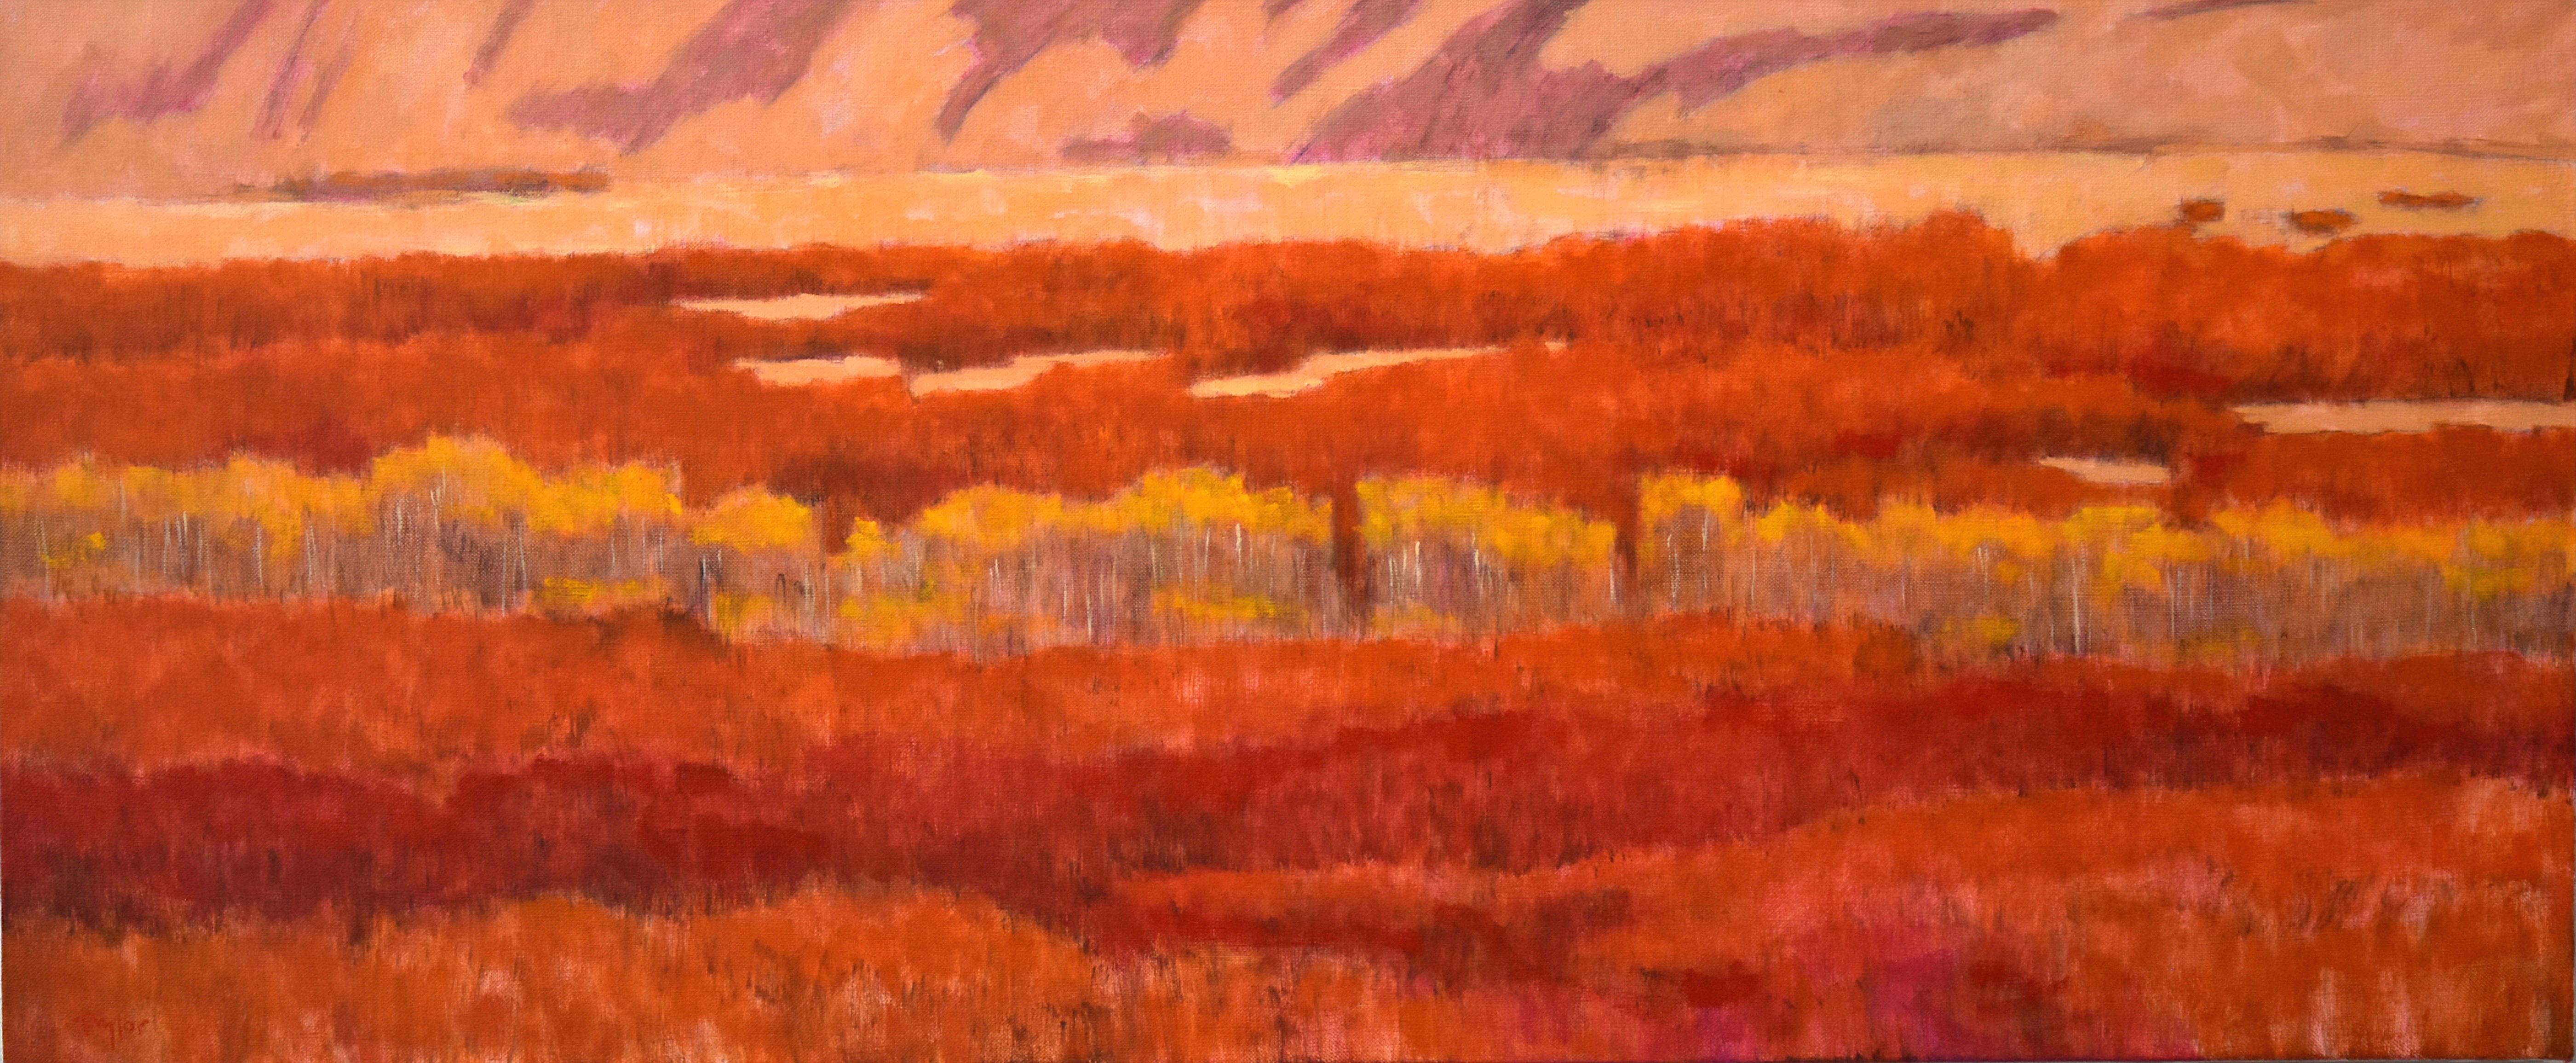 Oak Ocean (Fall landscape, orange/red colors, Aspen trees, cliffs) - Painting by Andy Taylor